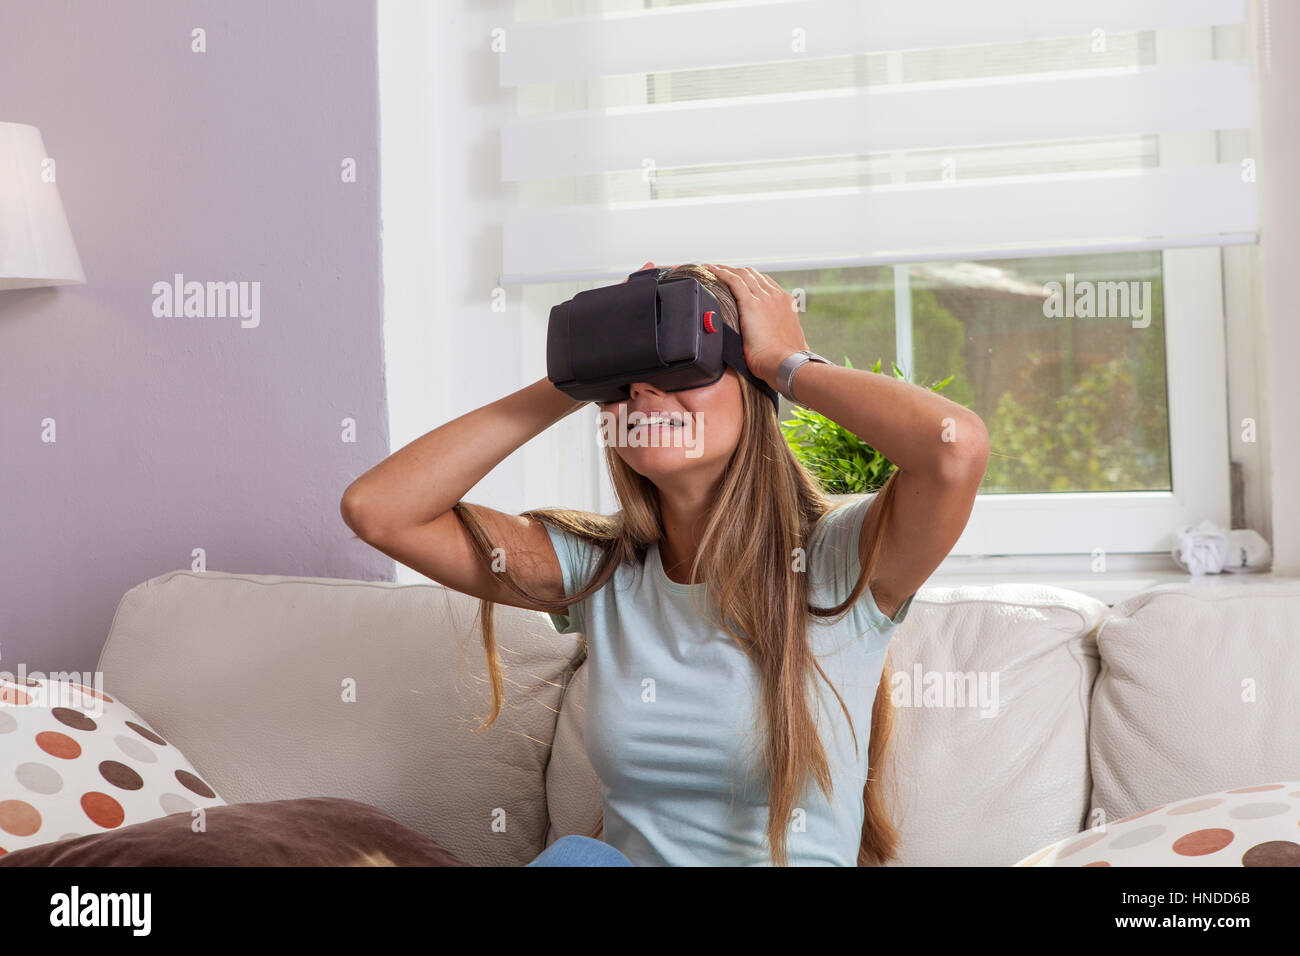 Girl seated on the couch playing with virtual reality headset got scared and put her hands on the head Stock Photo